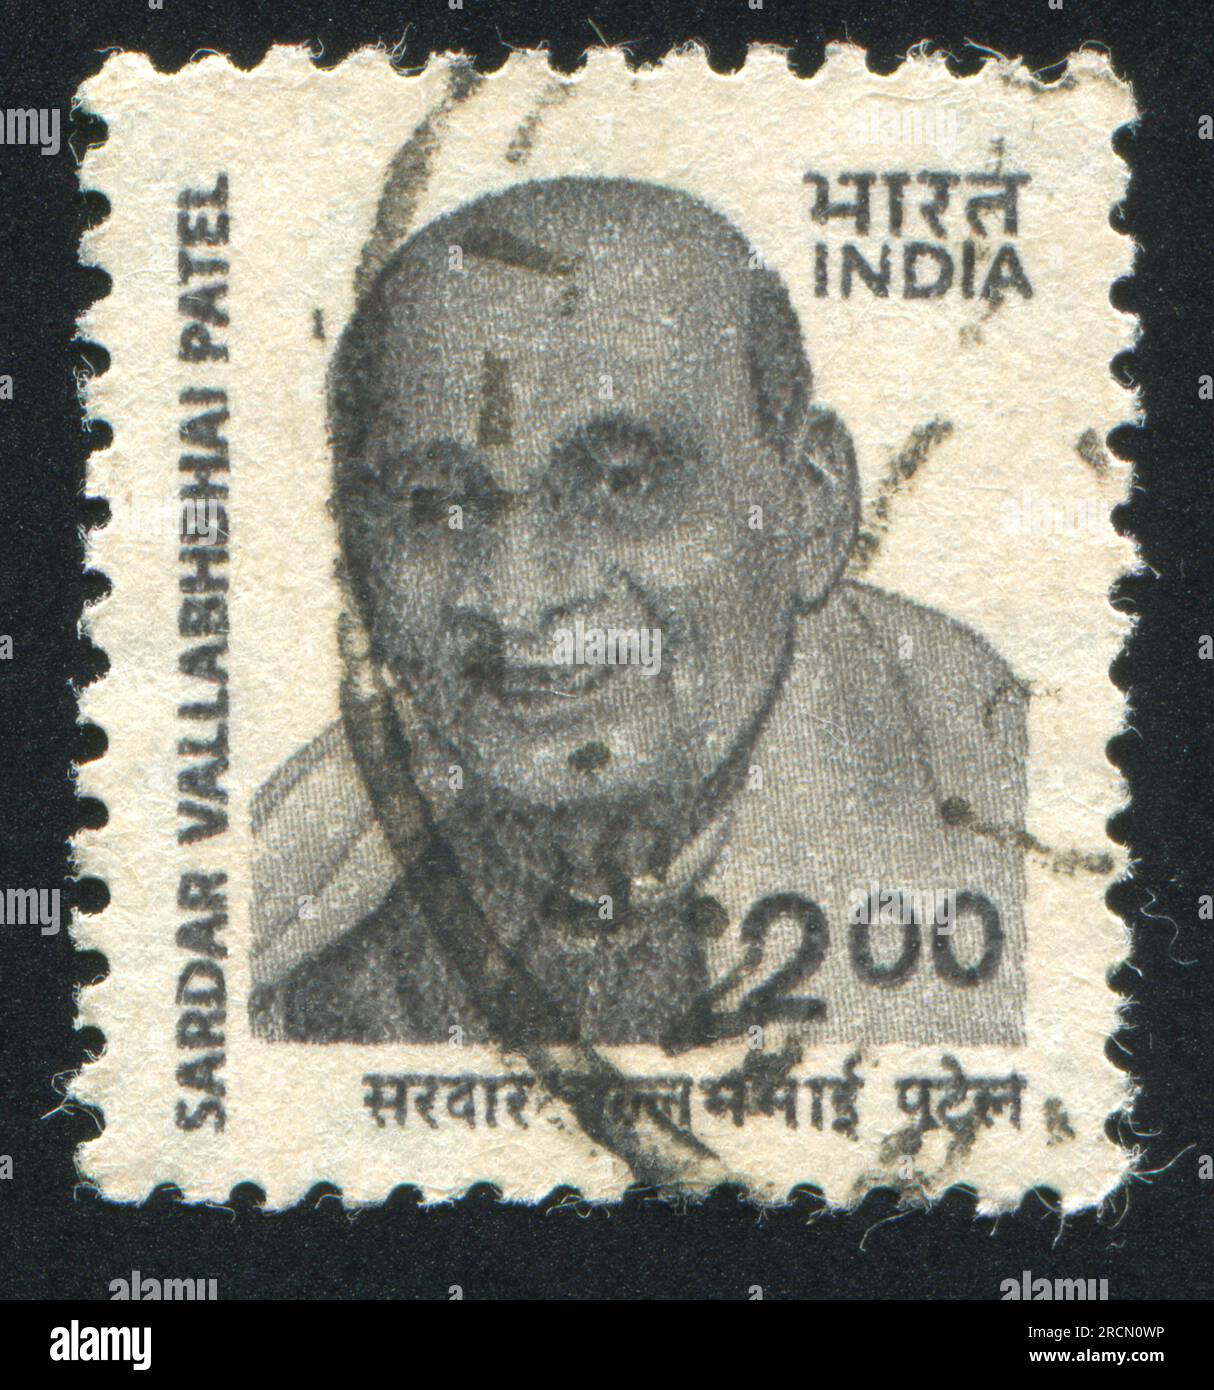 INDIA - CIRCA 2000: stamp printed by India, shows jewellery, circa